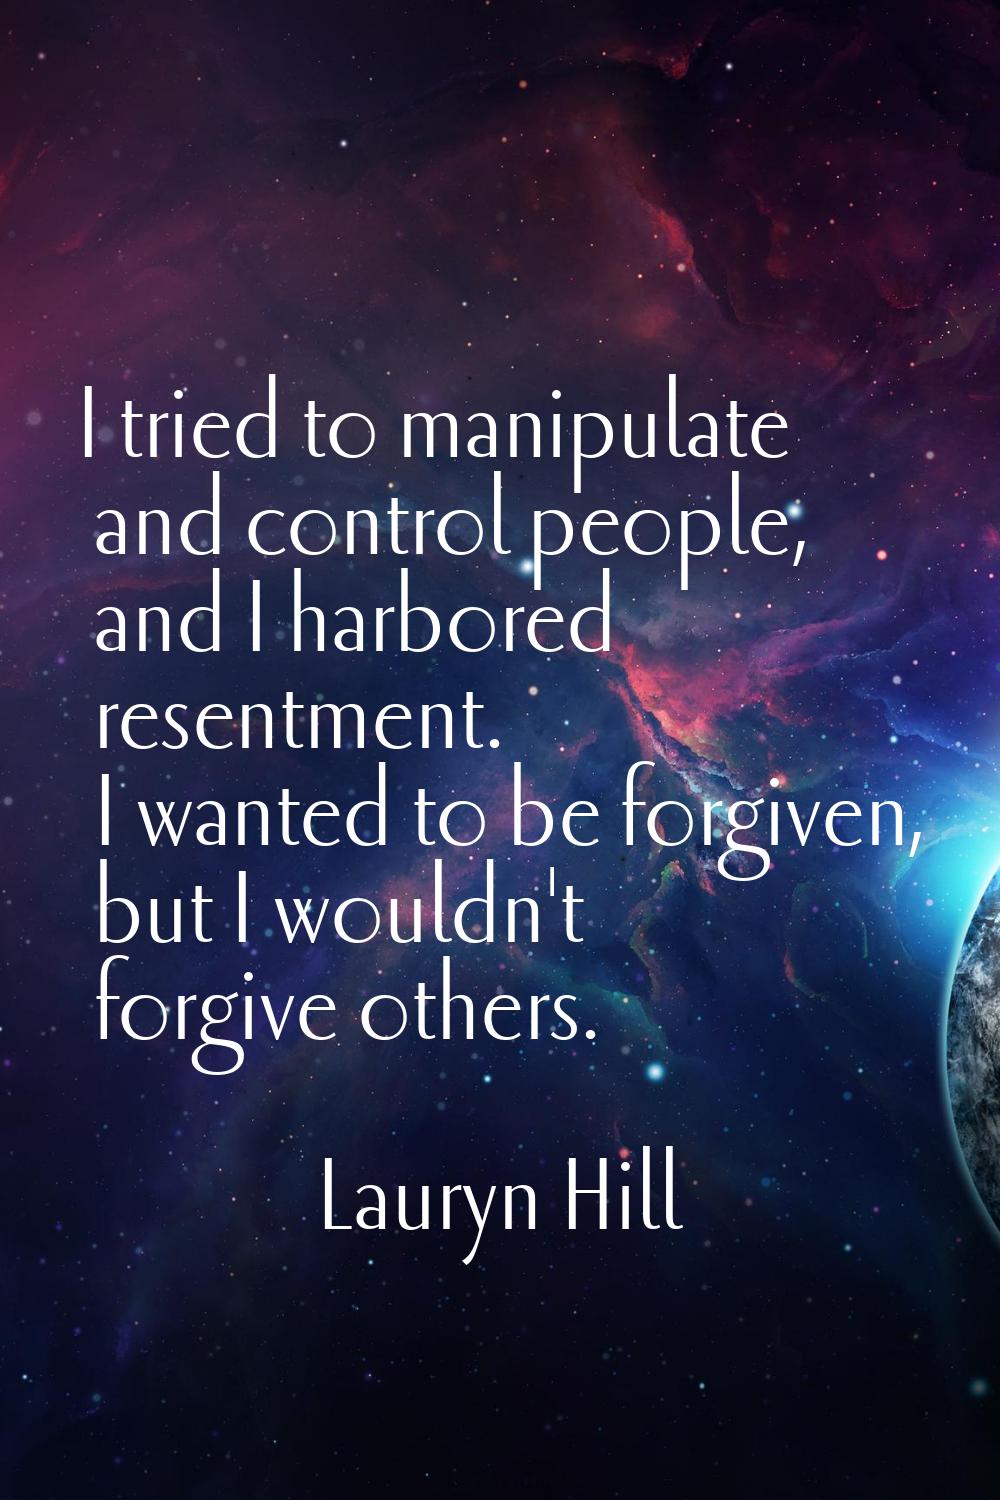 I tried to manipulate and control people, and I harbored resentment. I wanted to be forgiven, but I